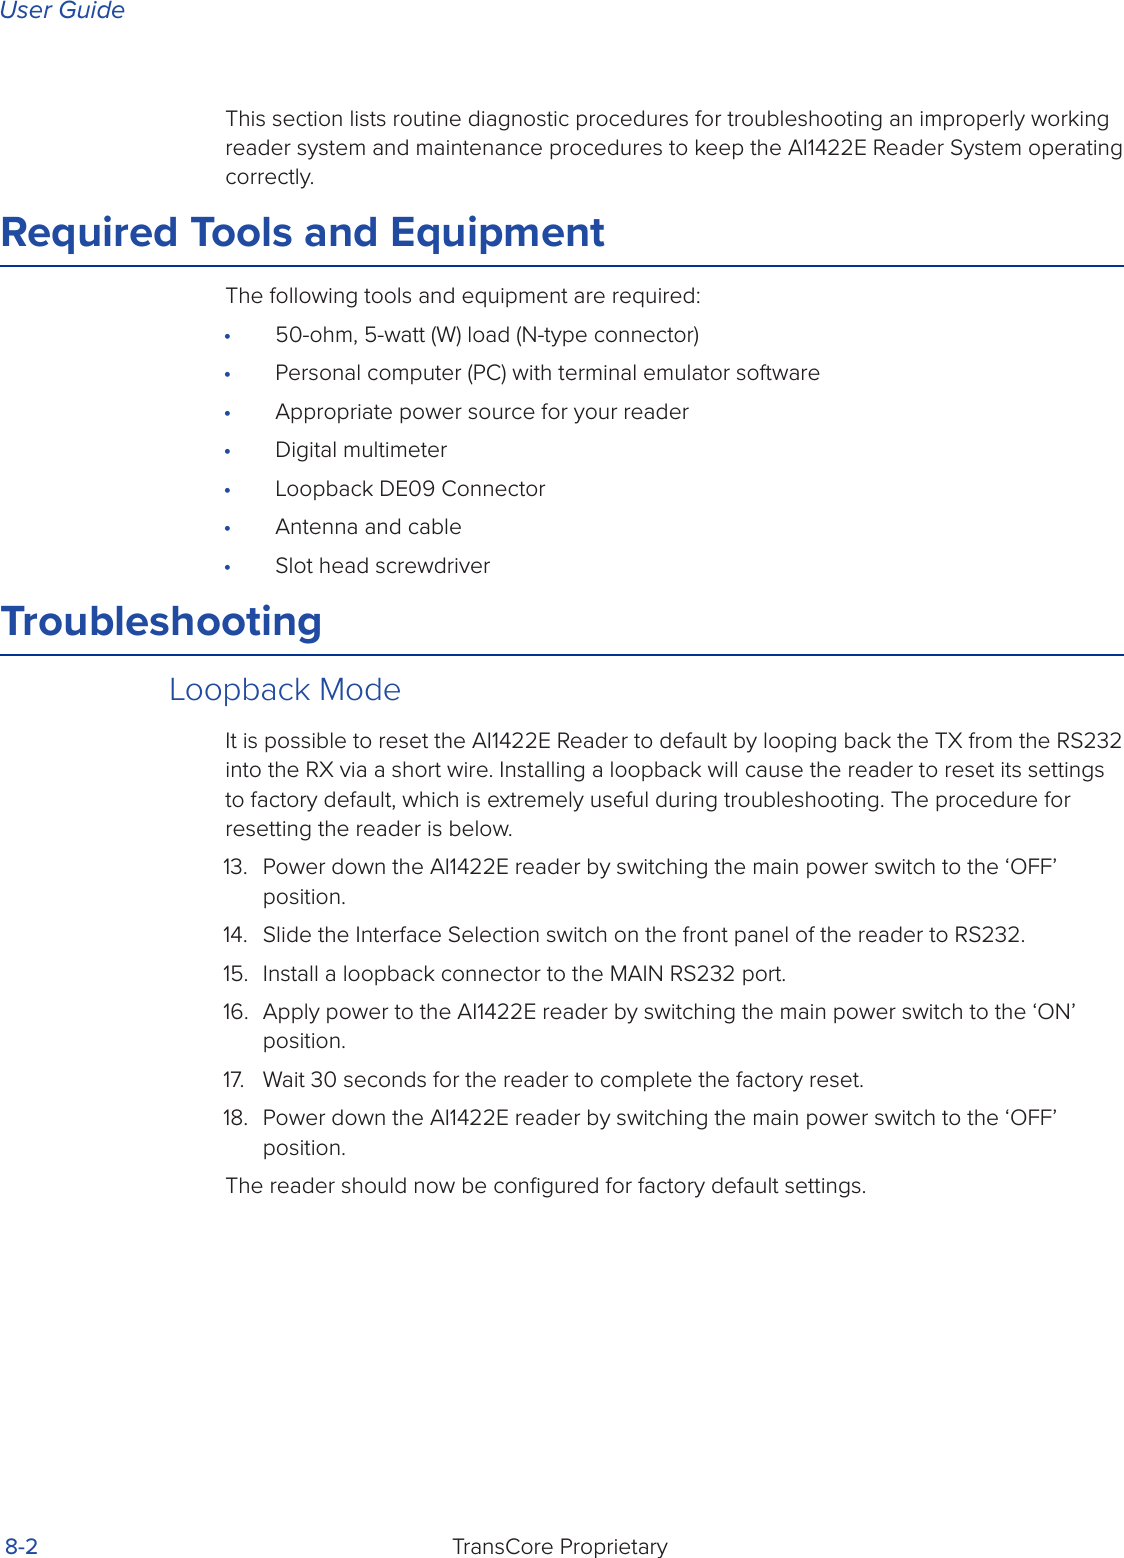 User GuideTransCore Proprietary 8-2This section lists routine diagnostic procedures for troubleshooting an improperly working reader system and maintenance procedures to keep the AI1422E Reader System operating correctly.Required Tools and EquipmentThe following tools and equipment are required:•  50-ohm, 5-watt (W) load (N-type connector)•  Personal computer (PC) with terminal emulator software•  Appropriate power source for your reader•  Digital multimeter•  Loopback DE09 Connector•  Antenna and cable•  Slot head screwdriverTroubleshootingLoopback ModeIt is possible to reset the AI1422E Reader to default by looping back the TX from the RS232 into the RX via a short wire. Installing a loopback will cause the reader to reset its settings to factory default, which is extremely useful during troubleshooting. The procedure for resetting the reader is below.13.  Power down the AI1422E reader by switching the main power switch to the ‘OFF’ position.14.  Slide the Interface Selection switch on the front panel of the reader to RS232.15.  Install a loopback connector to the MAIN RS232 port. 16.  Apply power to the AI1422E reader by switching the main power switch to the ‘ON’ position.17.  Wait 30 seconds for the reader to complete the factory reset.18.  Power down the AI1422E reader by switching the main power switch to the ‘OFF’ position.The reader should now be conﬁgured for factory default settings.